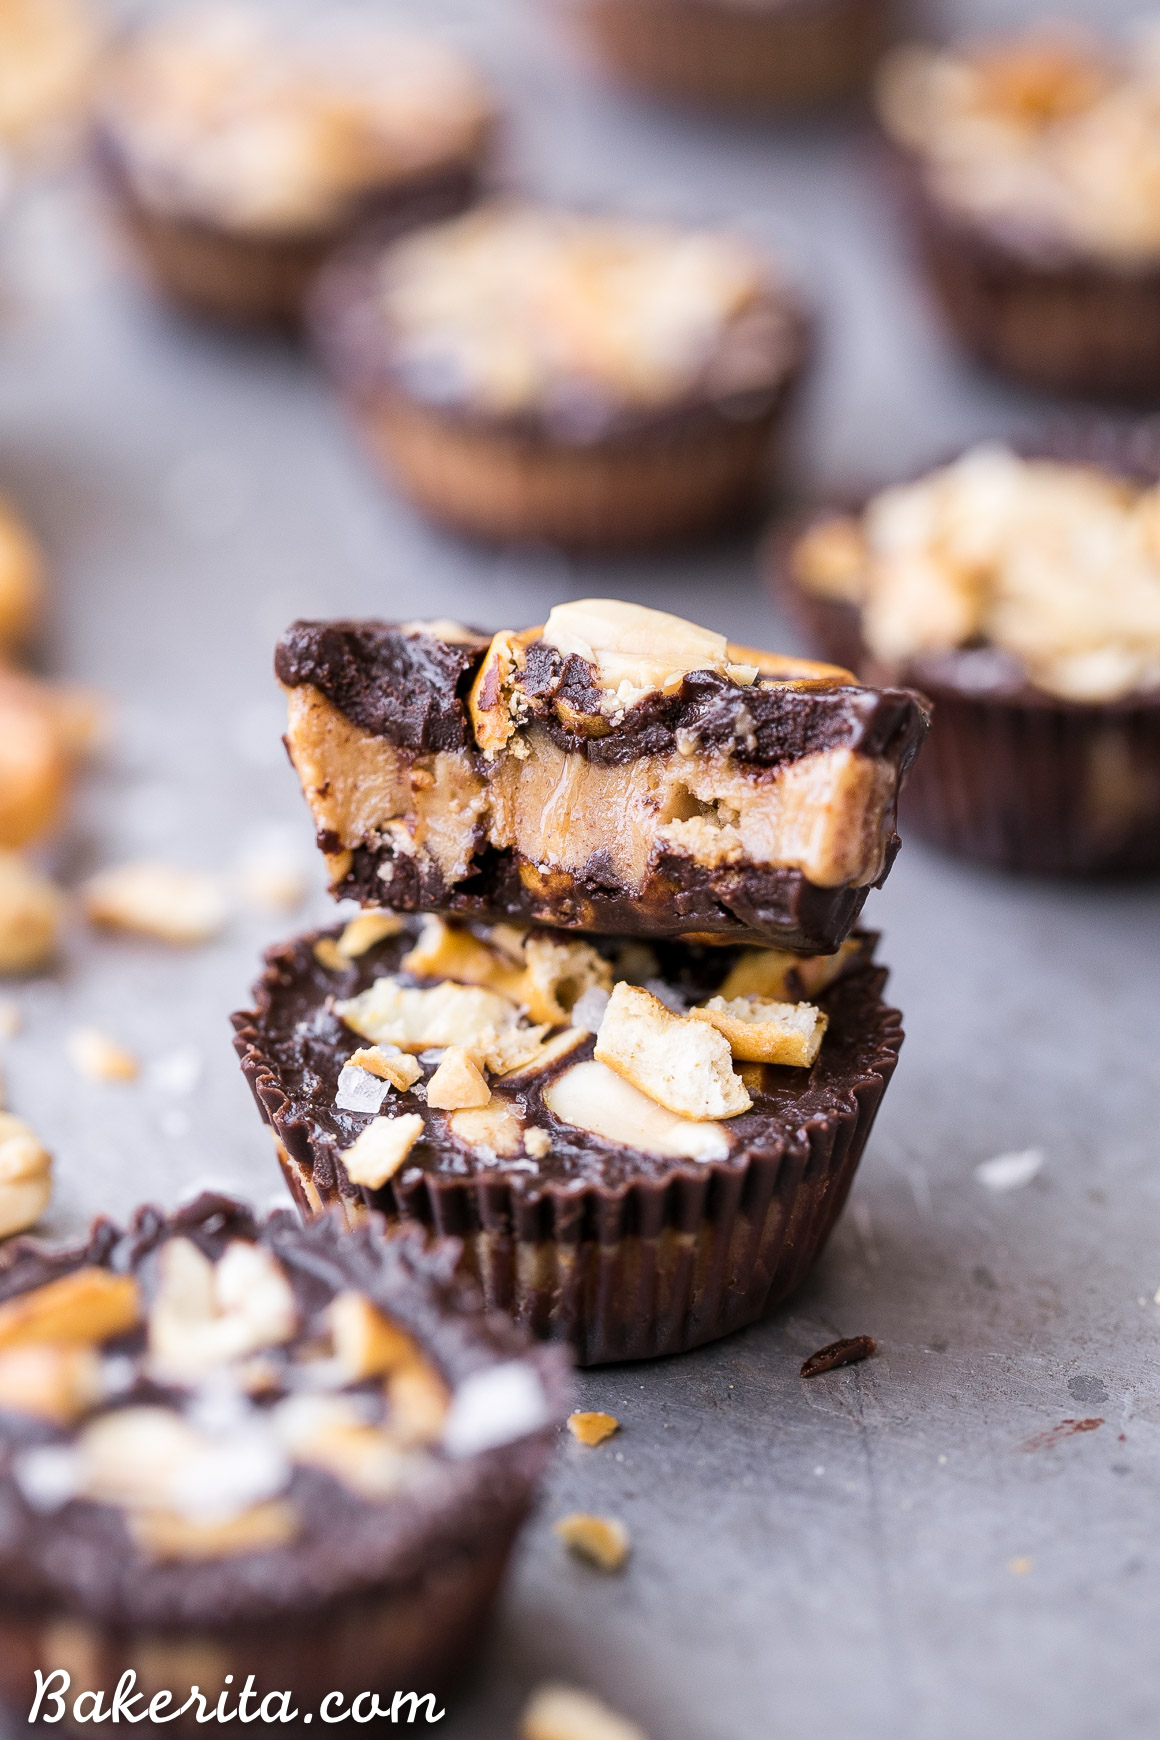 These Chocolate Pretzel Peanut Butter Cups are inspired by the Take 5 candy bar, but made with way more wholesome ingredients! These gluten-free, refined sugar-free and vegan candy cups are filled with peanut butter caramel, with pretzels and peanuts for crunch.